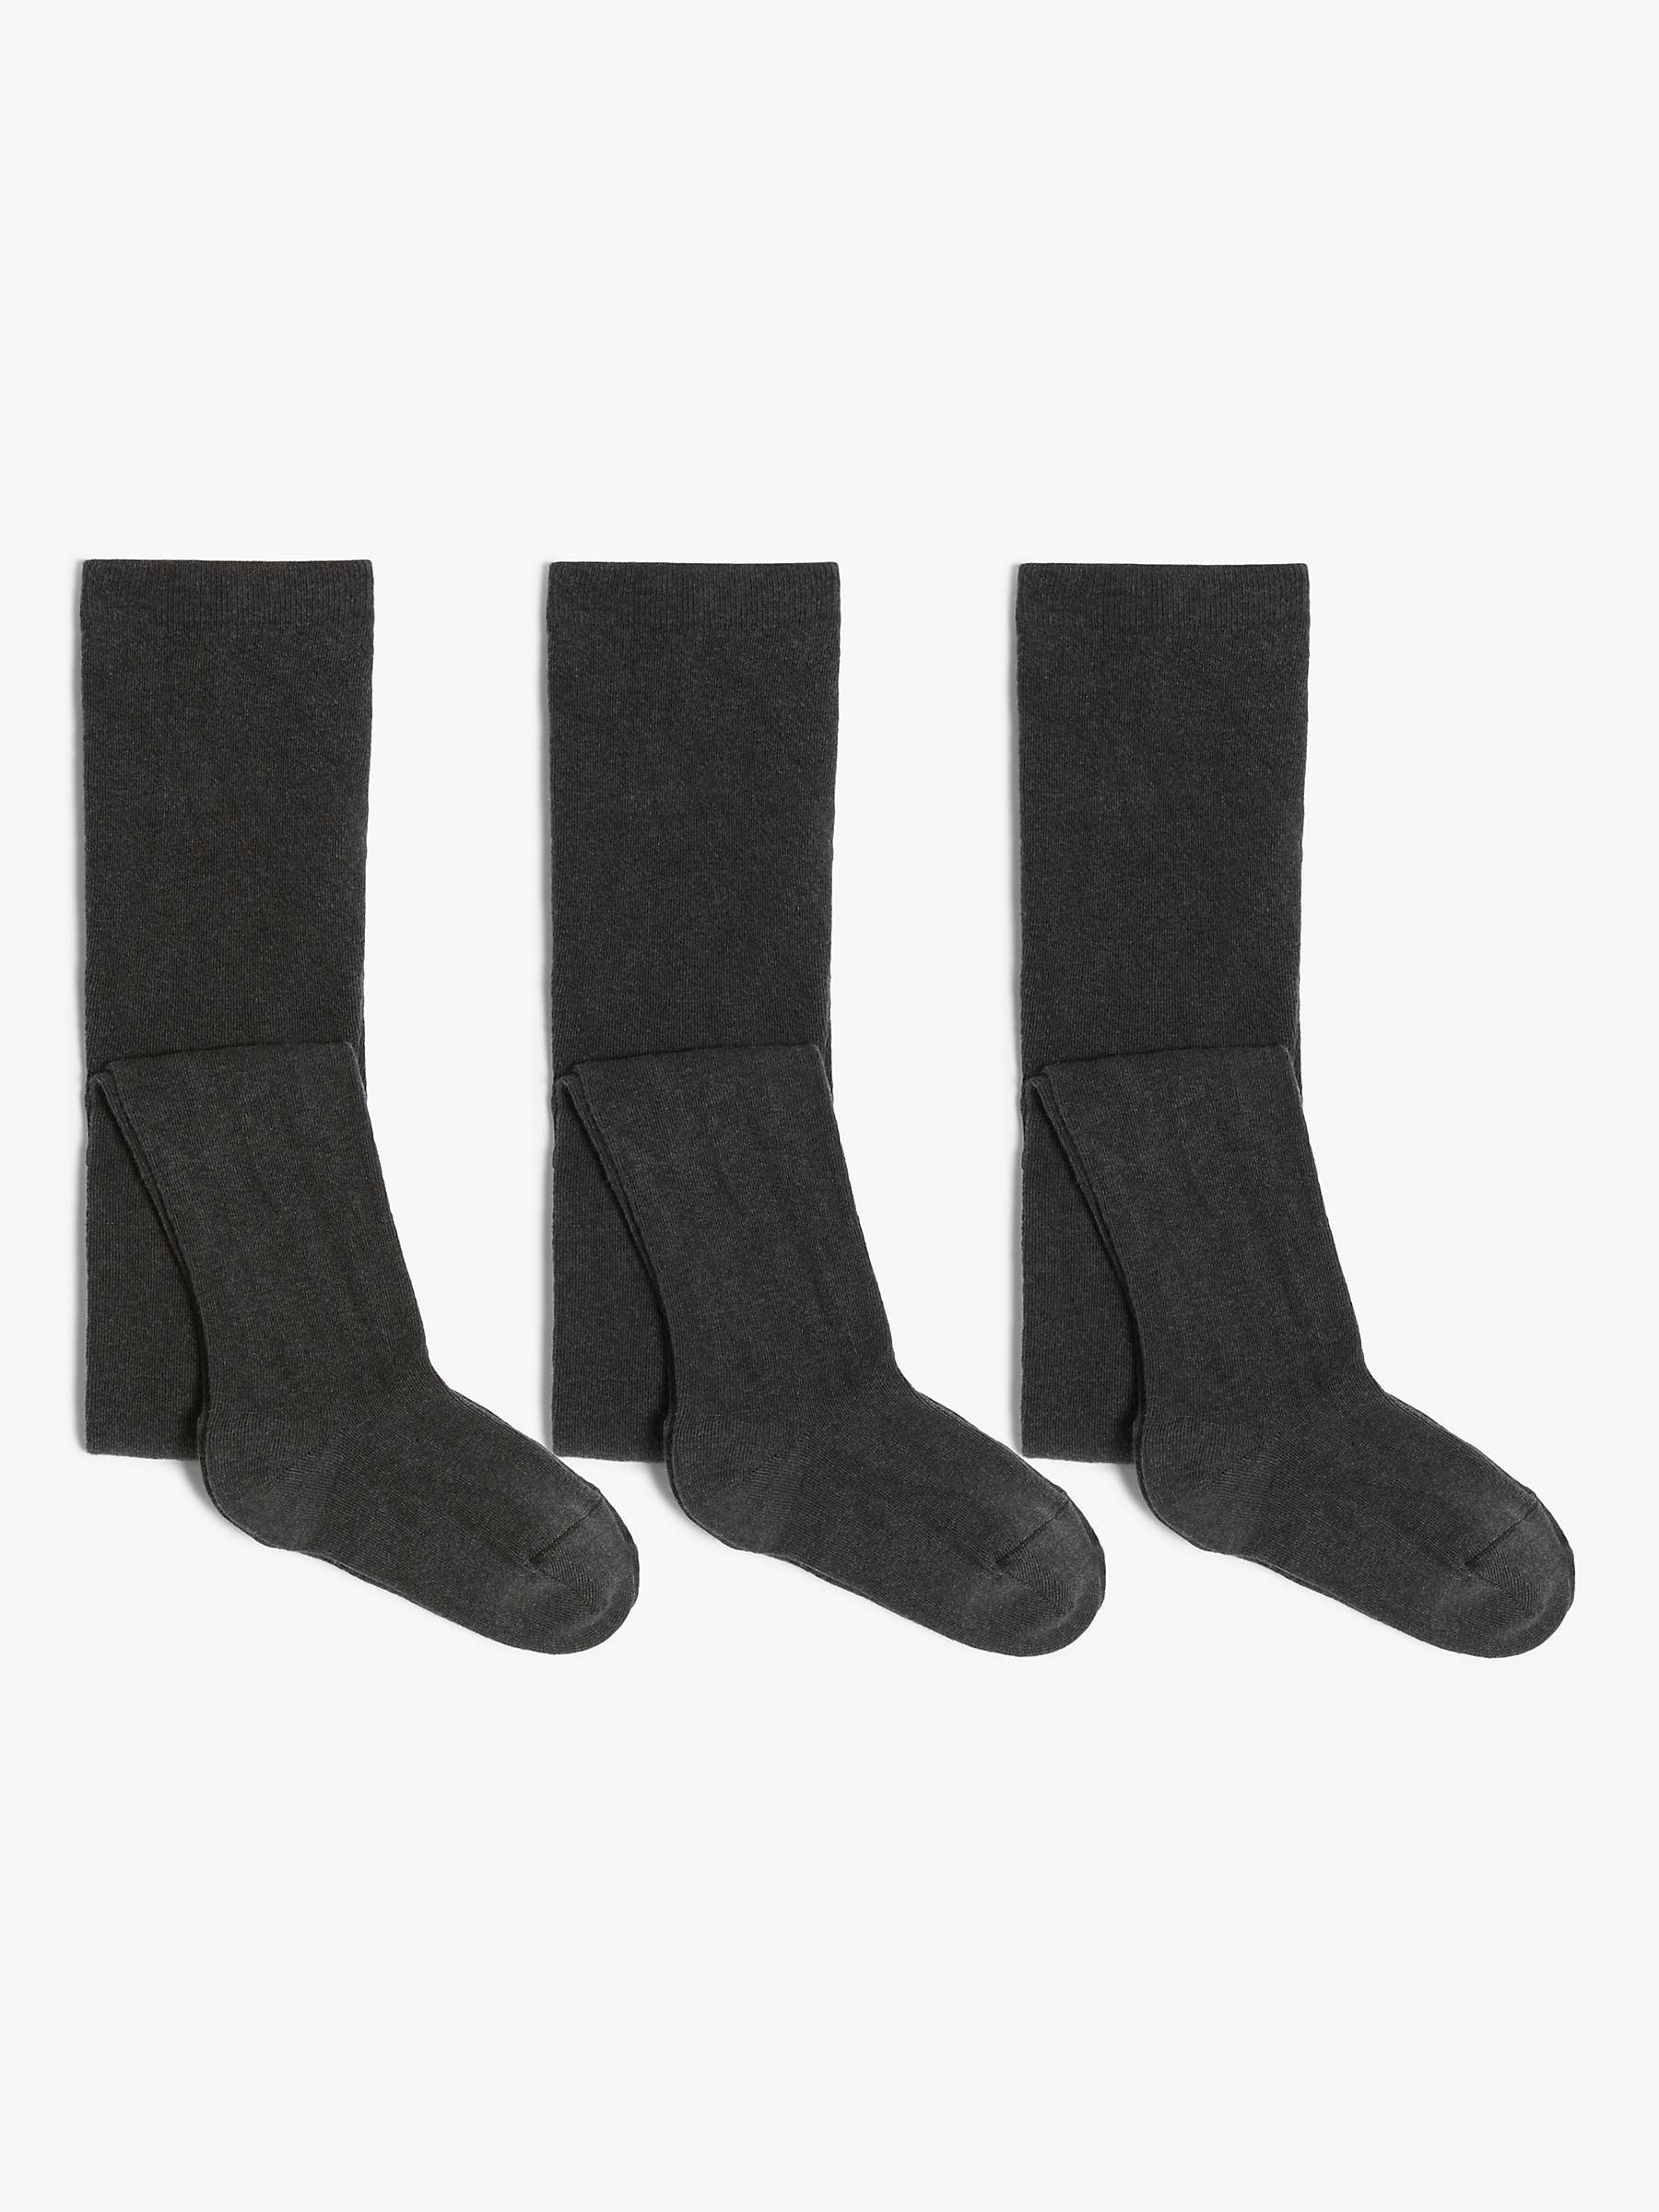 Buy John Lewis ANYDAY Kids' Cotton Rich Tights, Pack of 3 Online at johnlewis.com